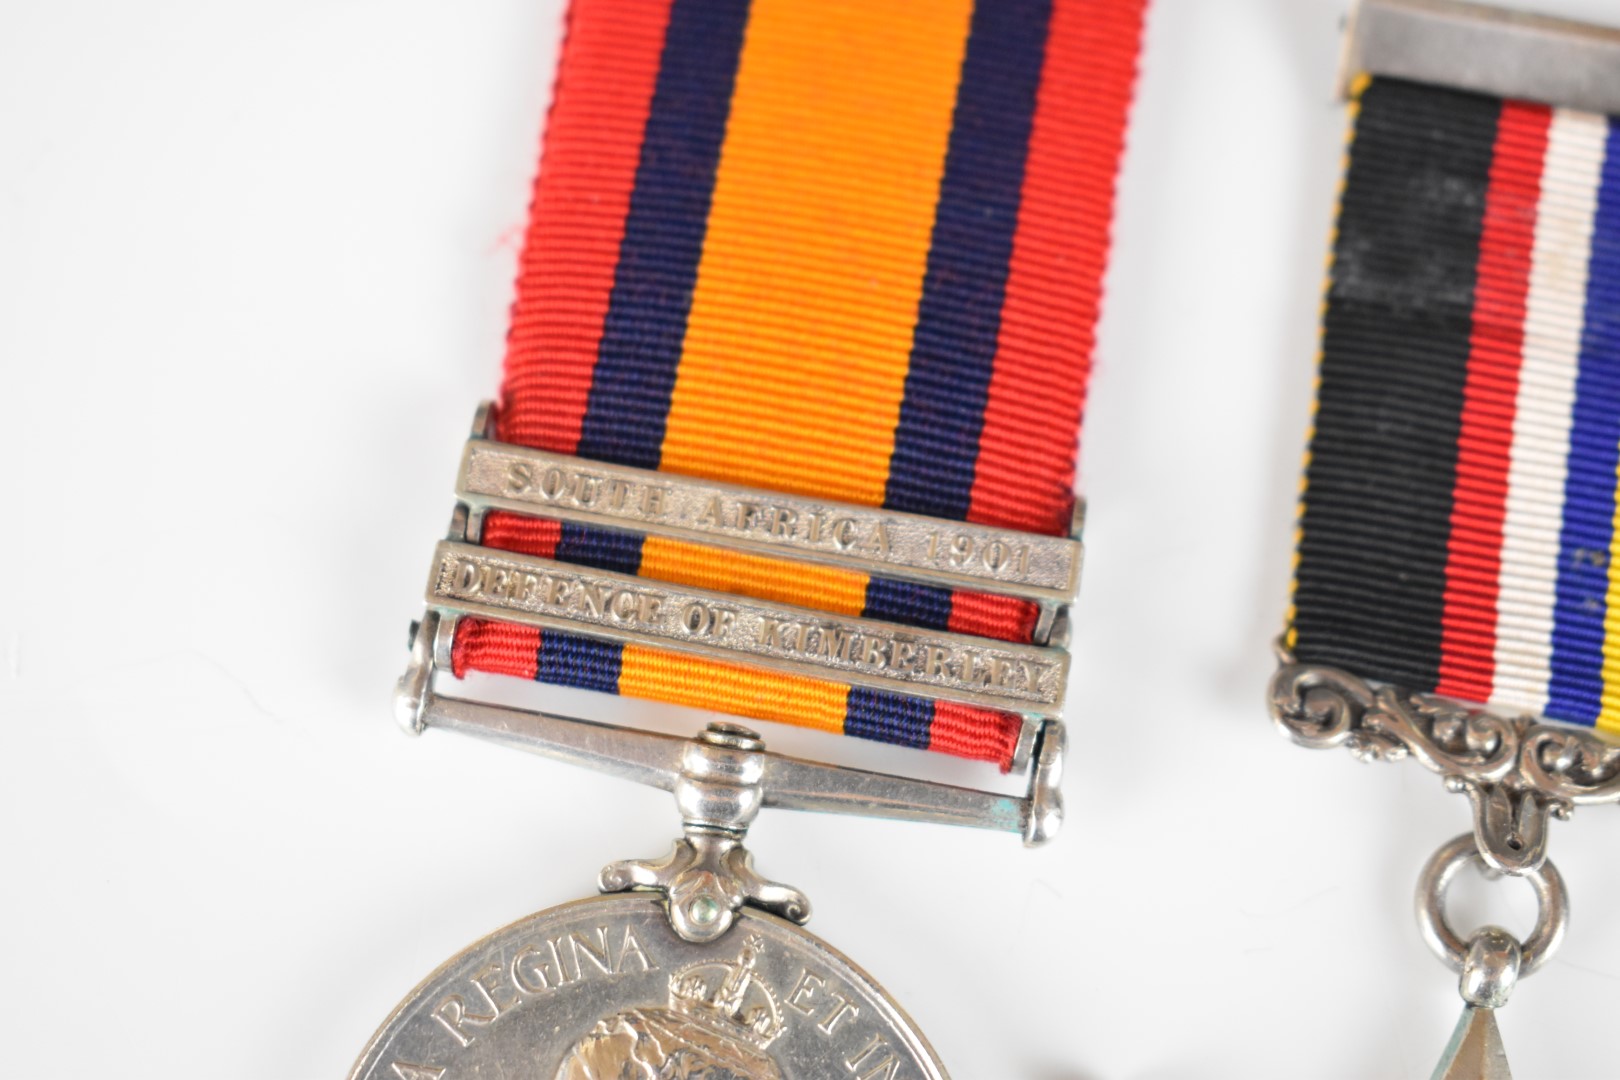 Queen's South Africa Medal with clasps for Defence of Kimberley and South Africa 1901 named to 828 - Image 3 of 22